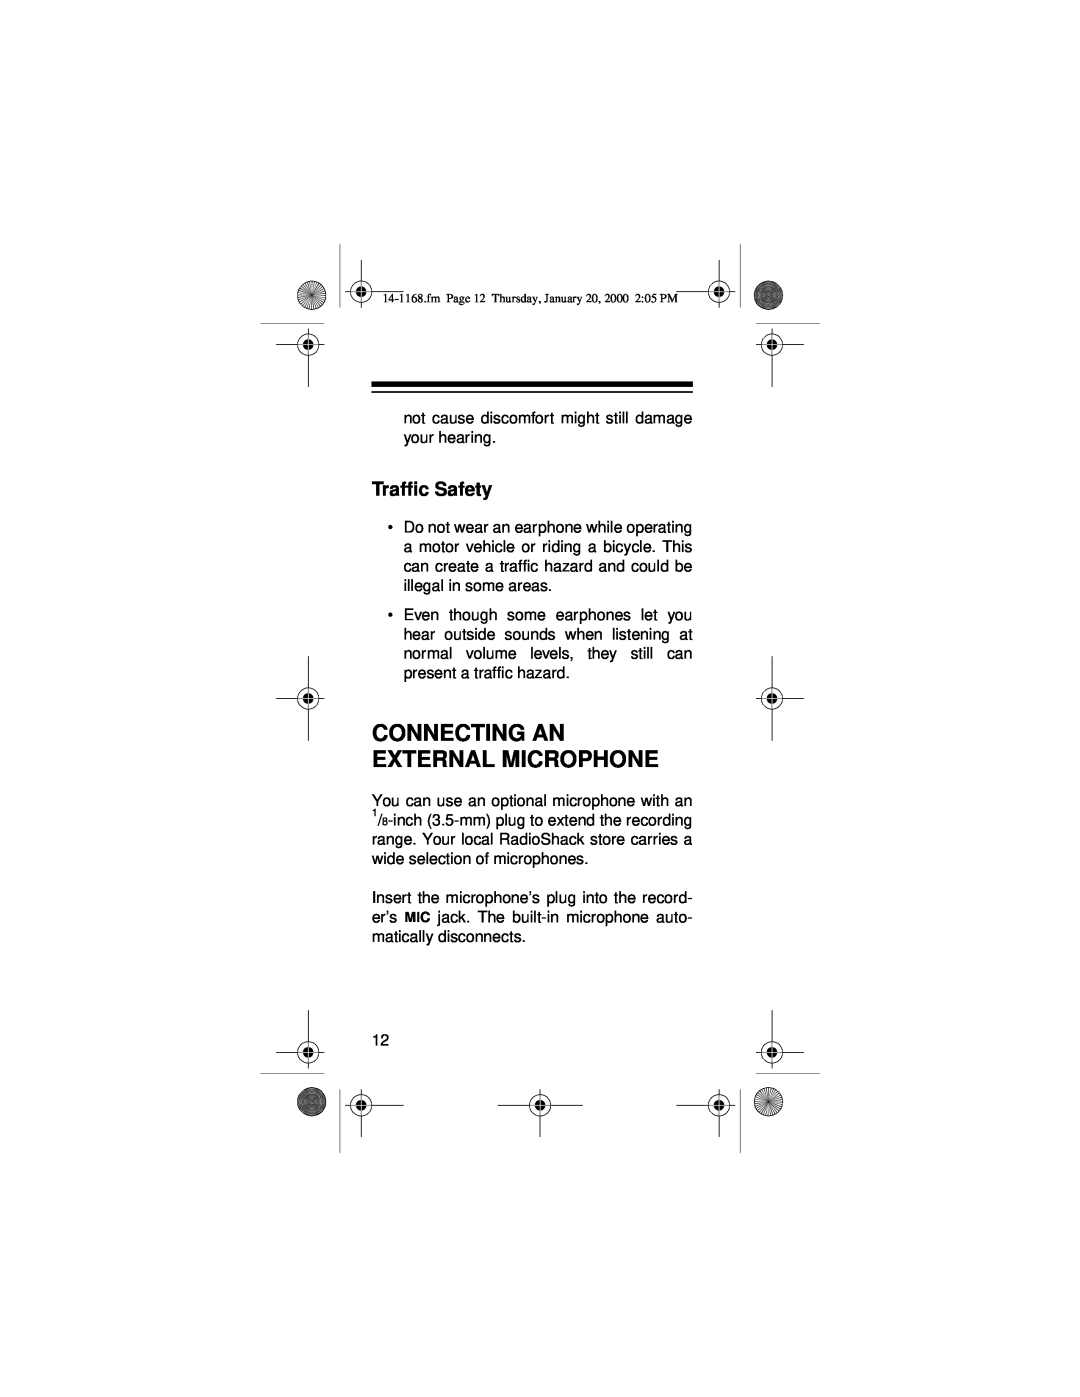 Optimus 14-1168, Micro-40 owner manual Connecting An External Microphone, Traffic Safety 